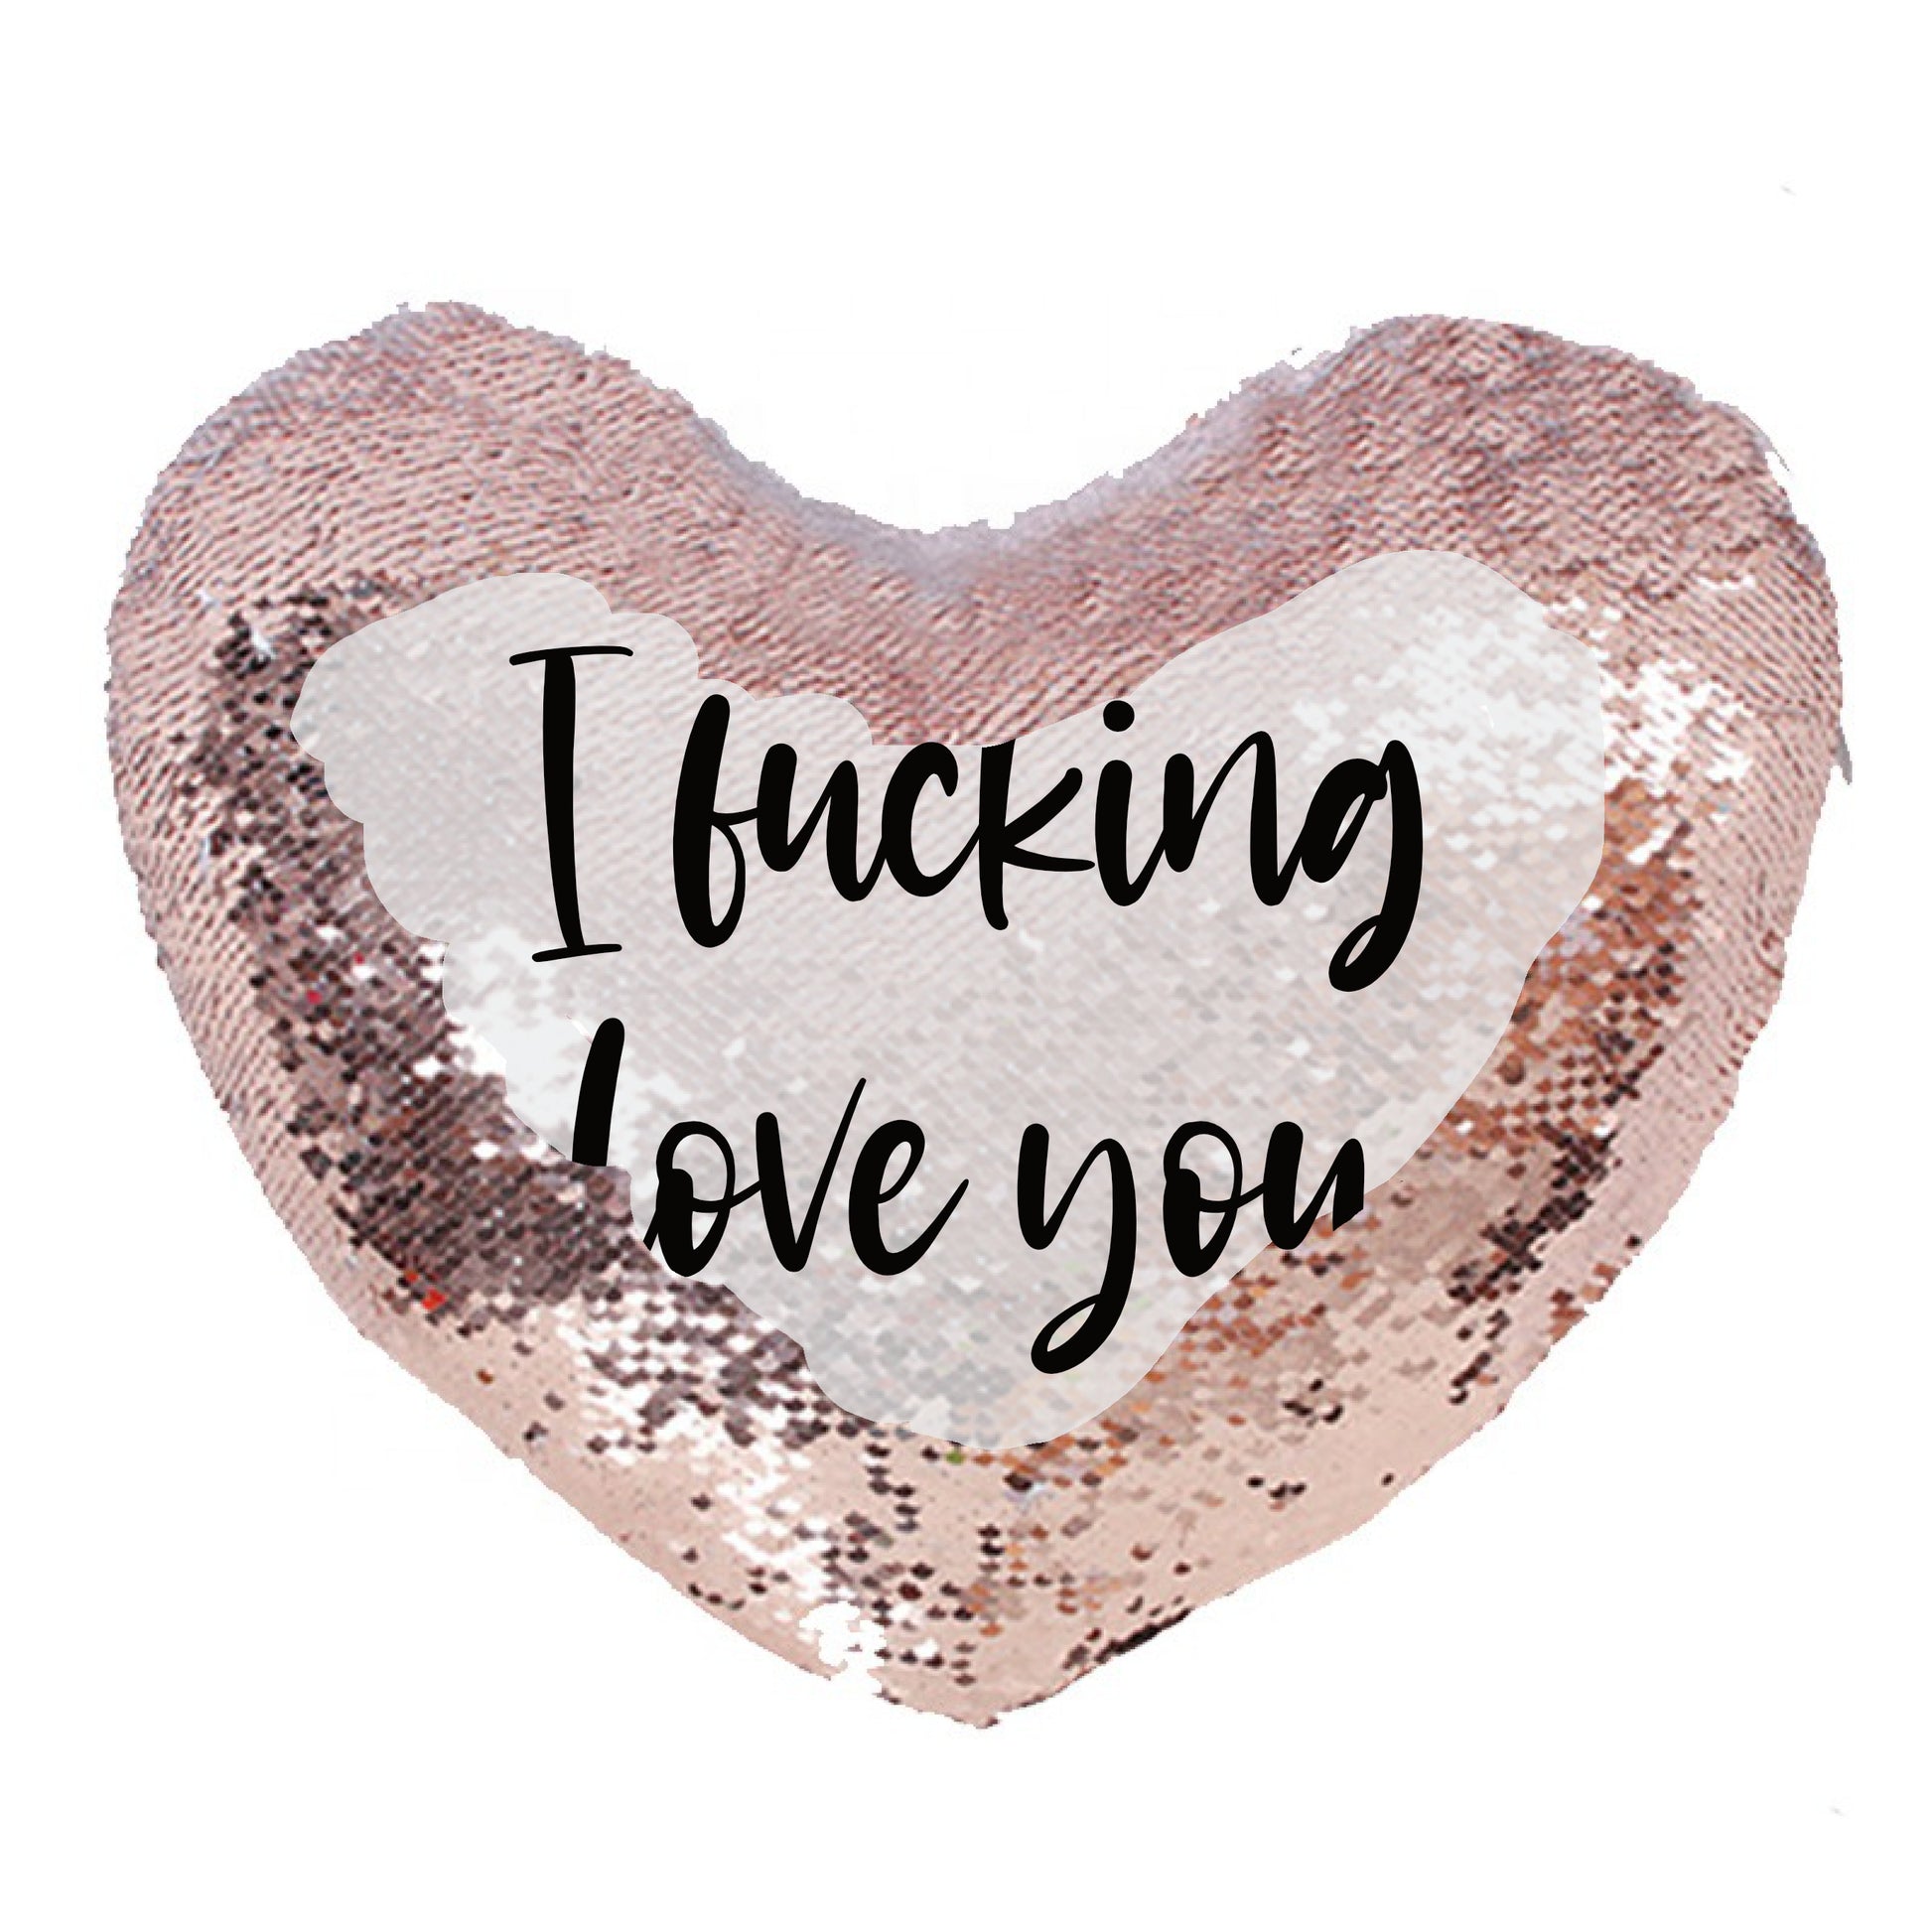 Rose gold heart shape sequin cushion with a funny sentiment printed on top, 'i fucking love you' in black ink.